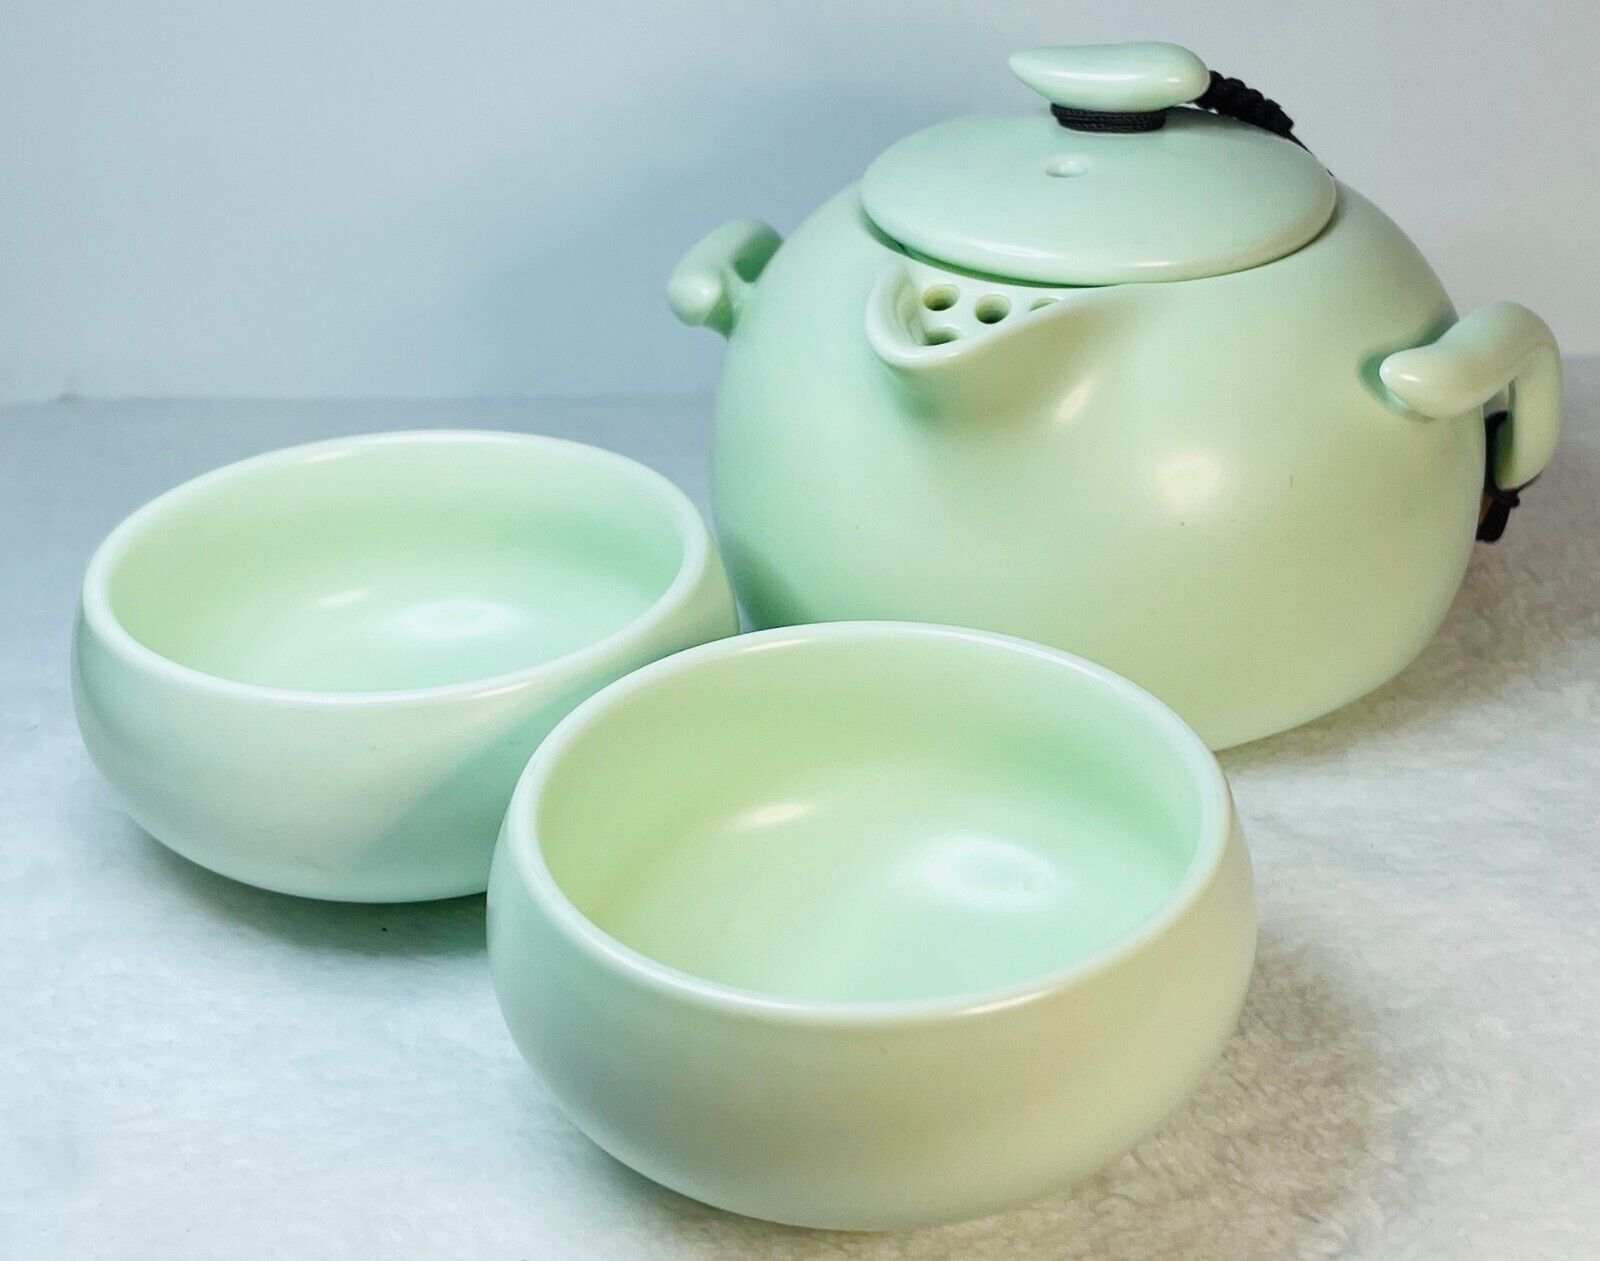 New Wong Fei Traditional Green Porcelain Chinese Tea Set Tea With 2 Cups